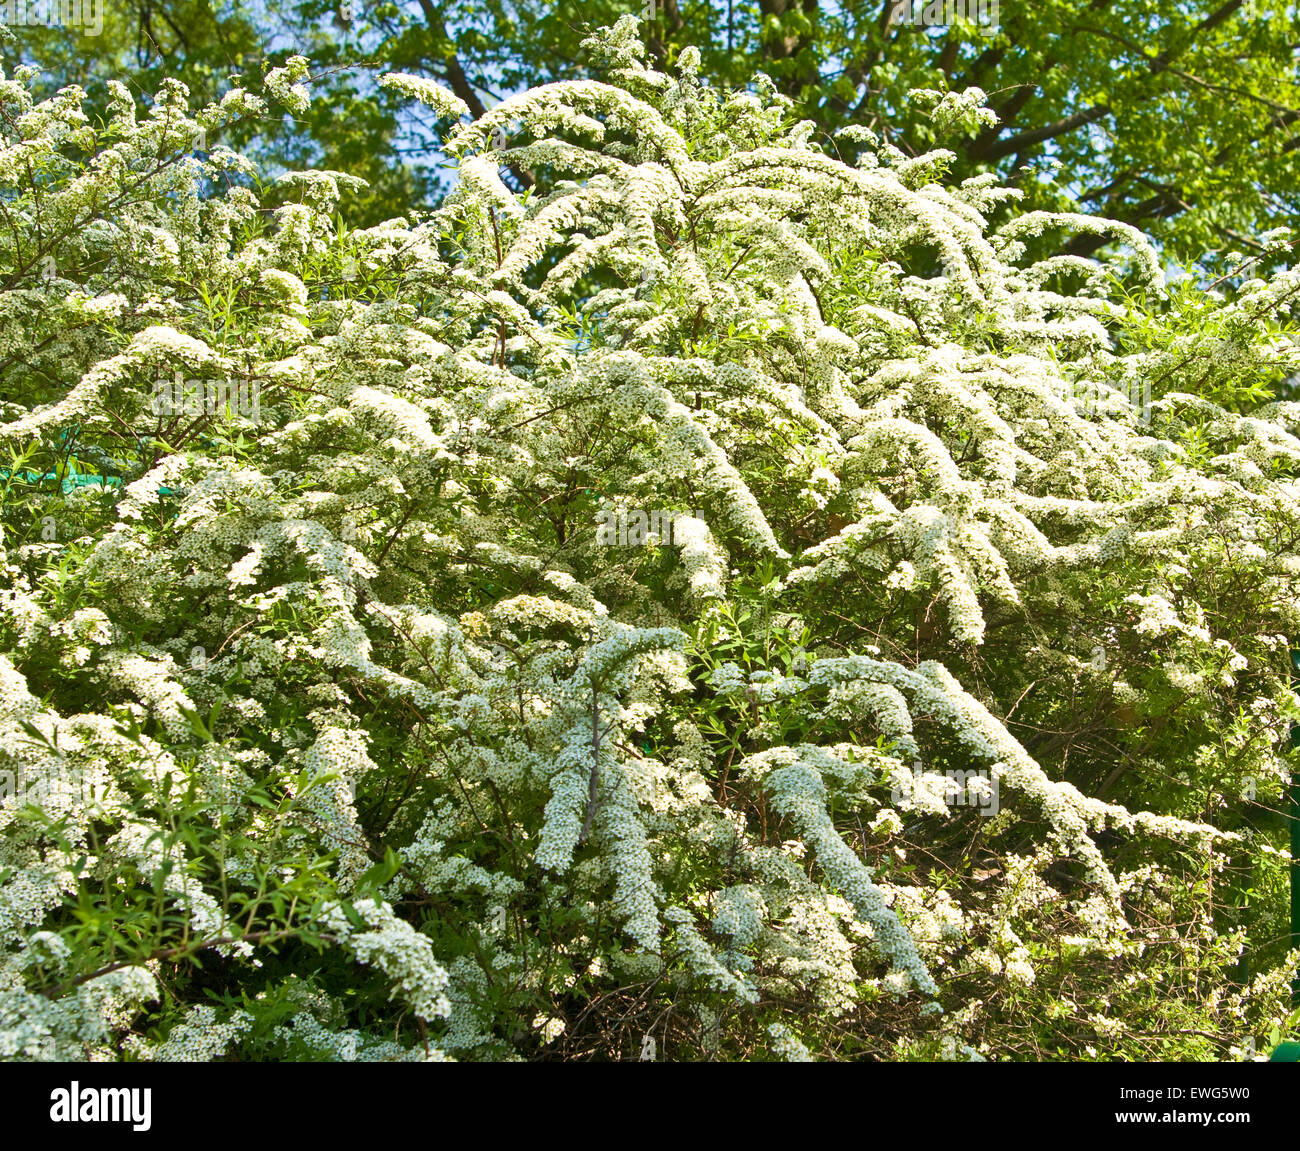 Shrub Of Japanese White Spirea In Blossom With Flowers Stock Photo Alamy